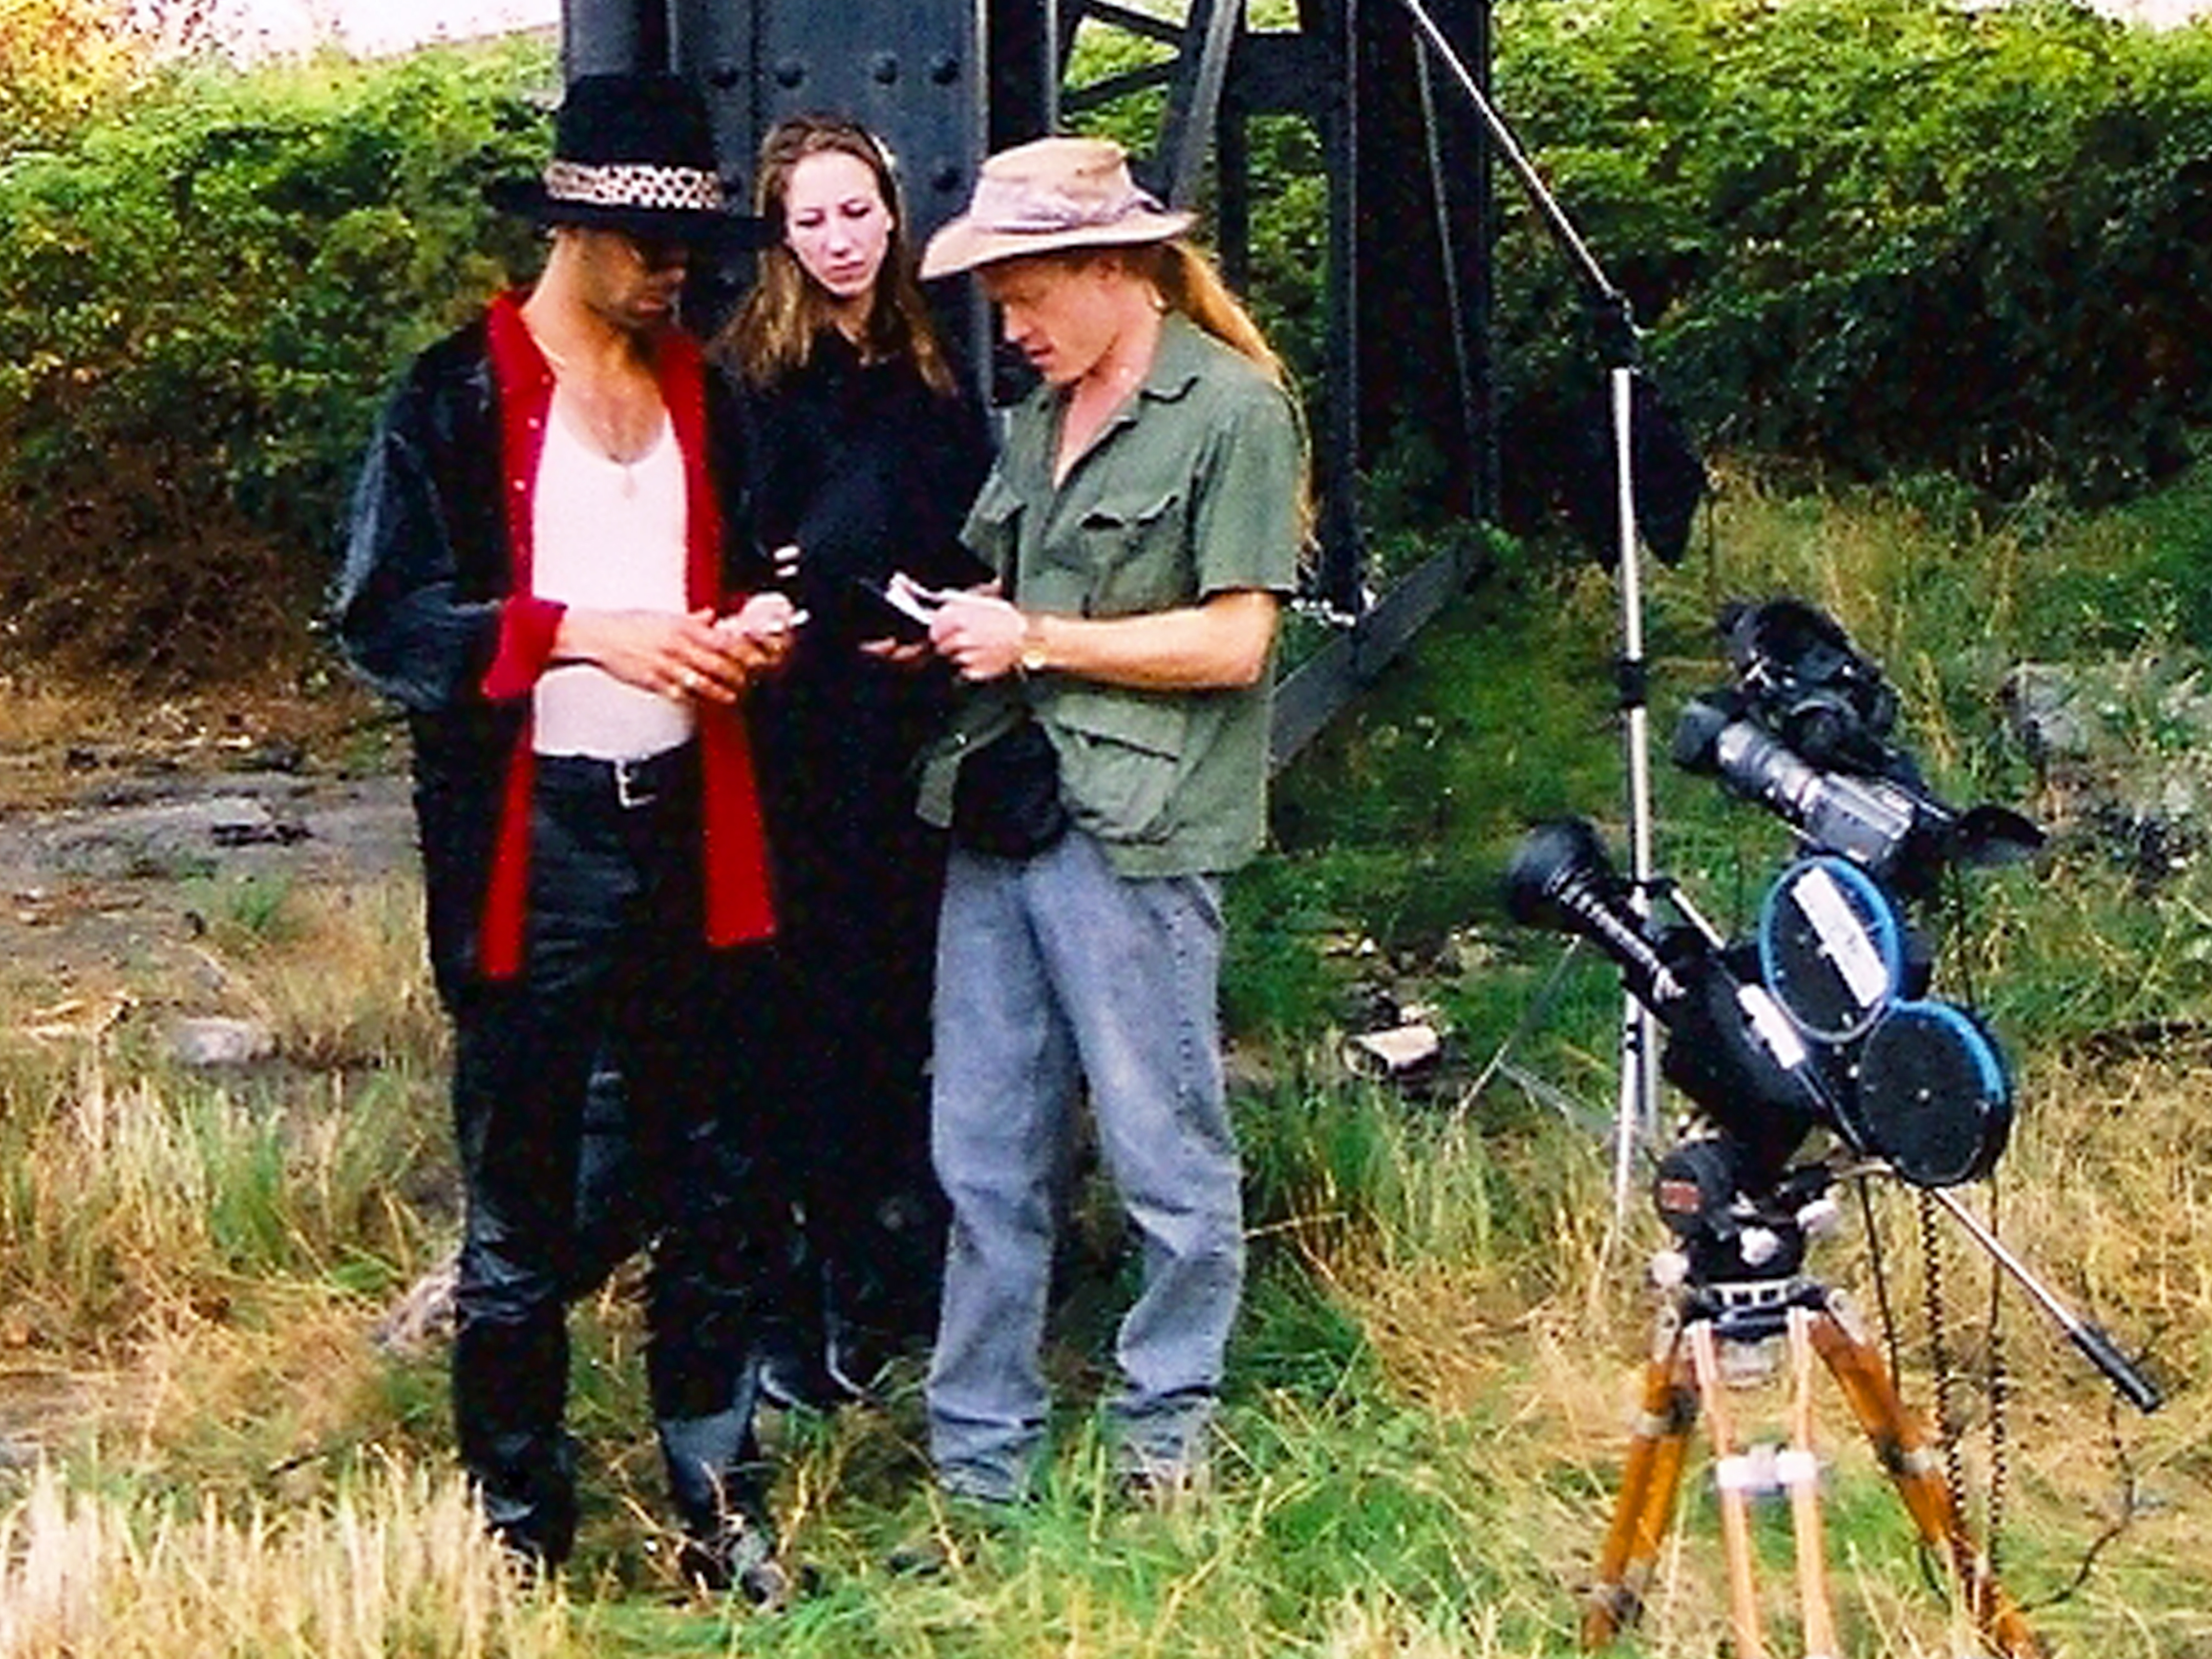 HT directs Pimp & Hooker scene for Vancouver Vagabond, 2002. Old and new school filmmaking: CP16mm with DV camera mounted with frames matched for replay and behind the scenes taping of scene.